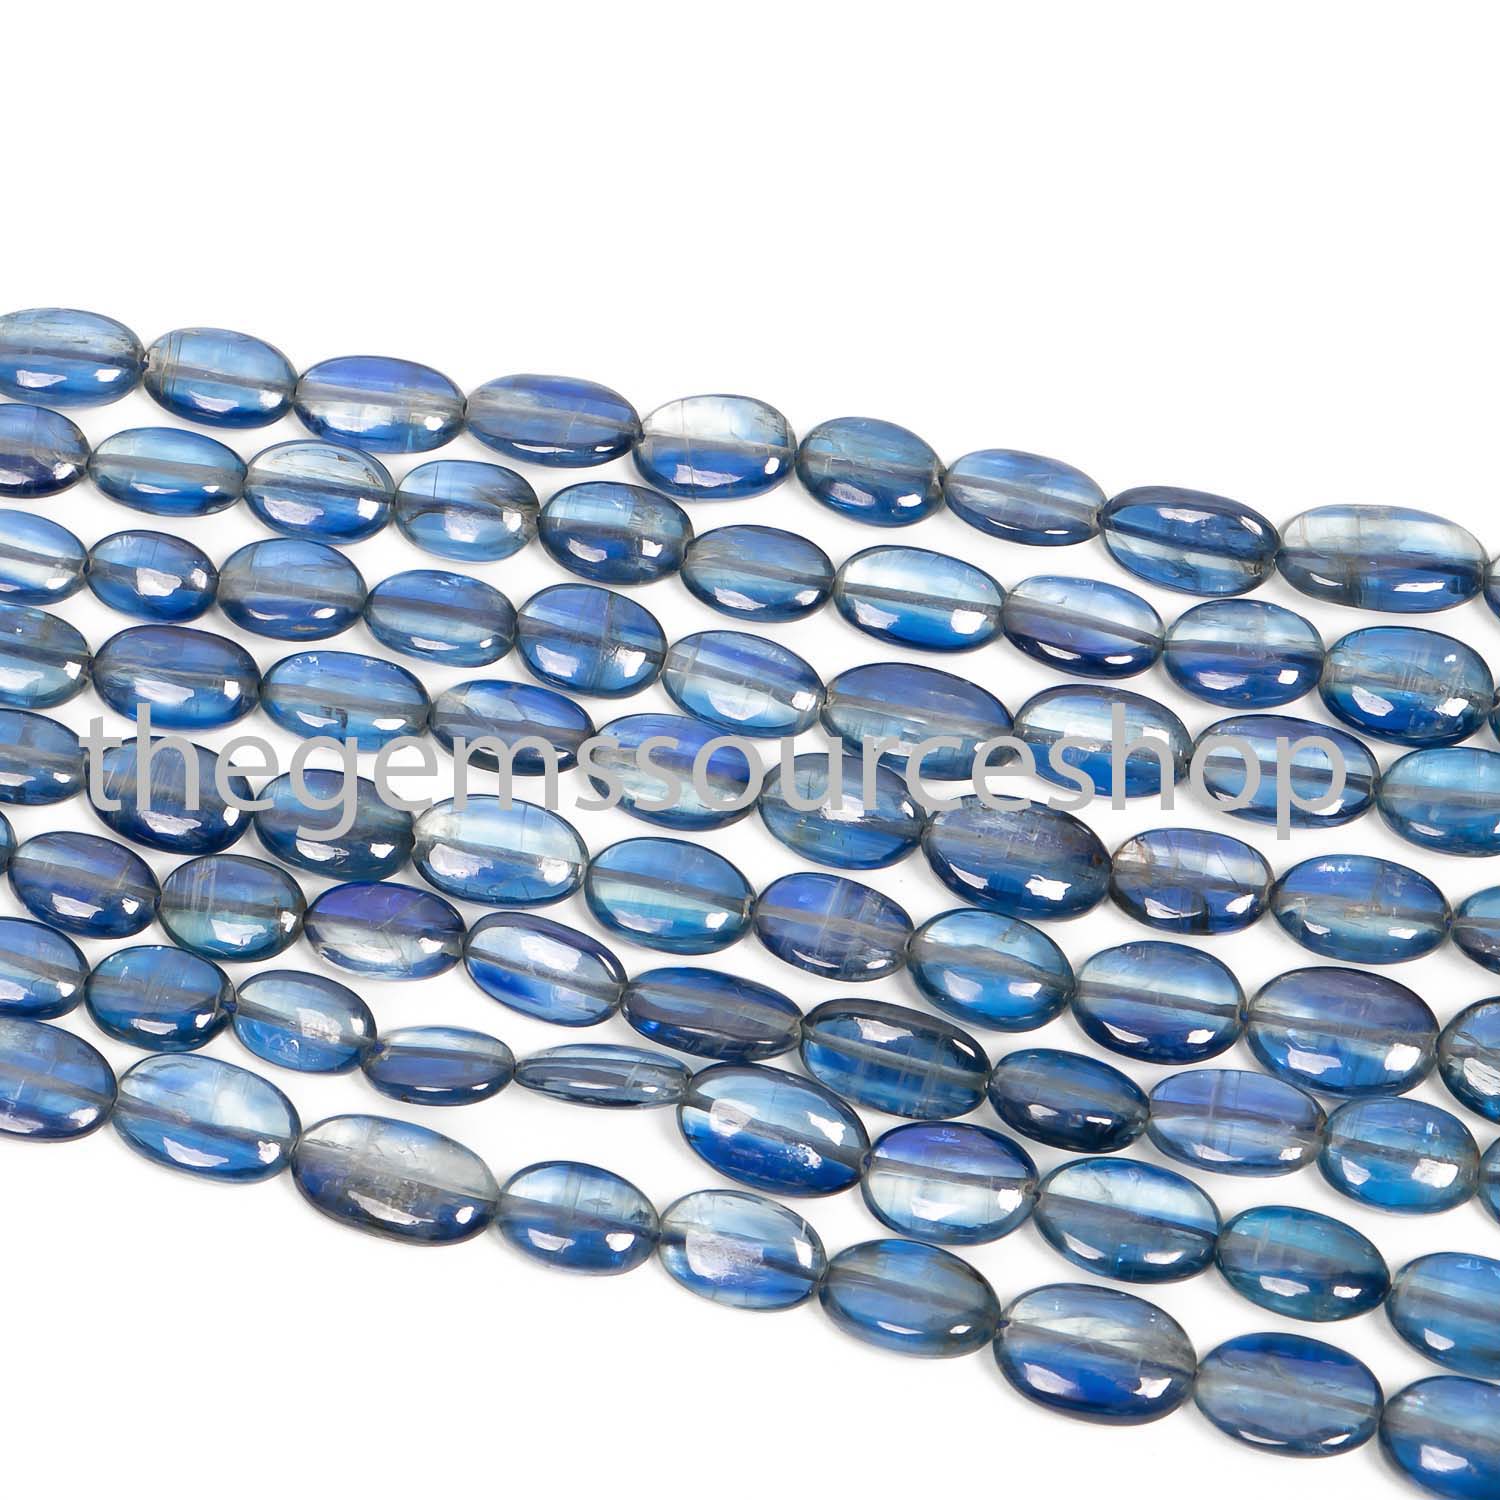 Natural Kyanite Smooth Oval Beads, Gemstone Beads Briolette, Wholesale Beads